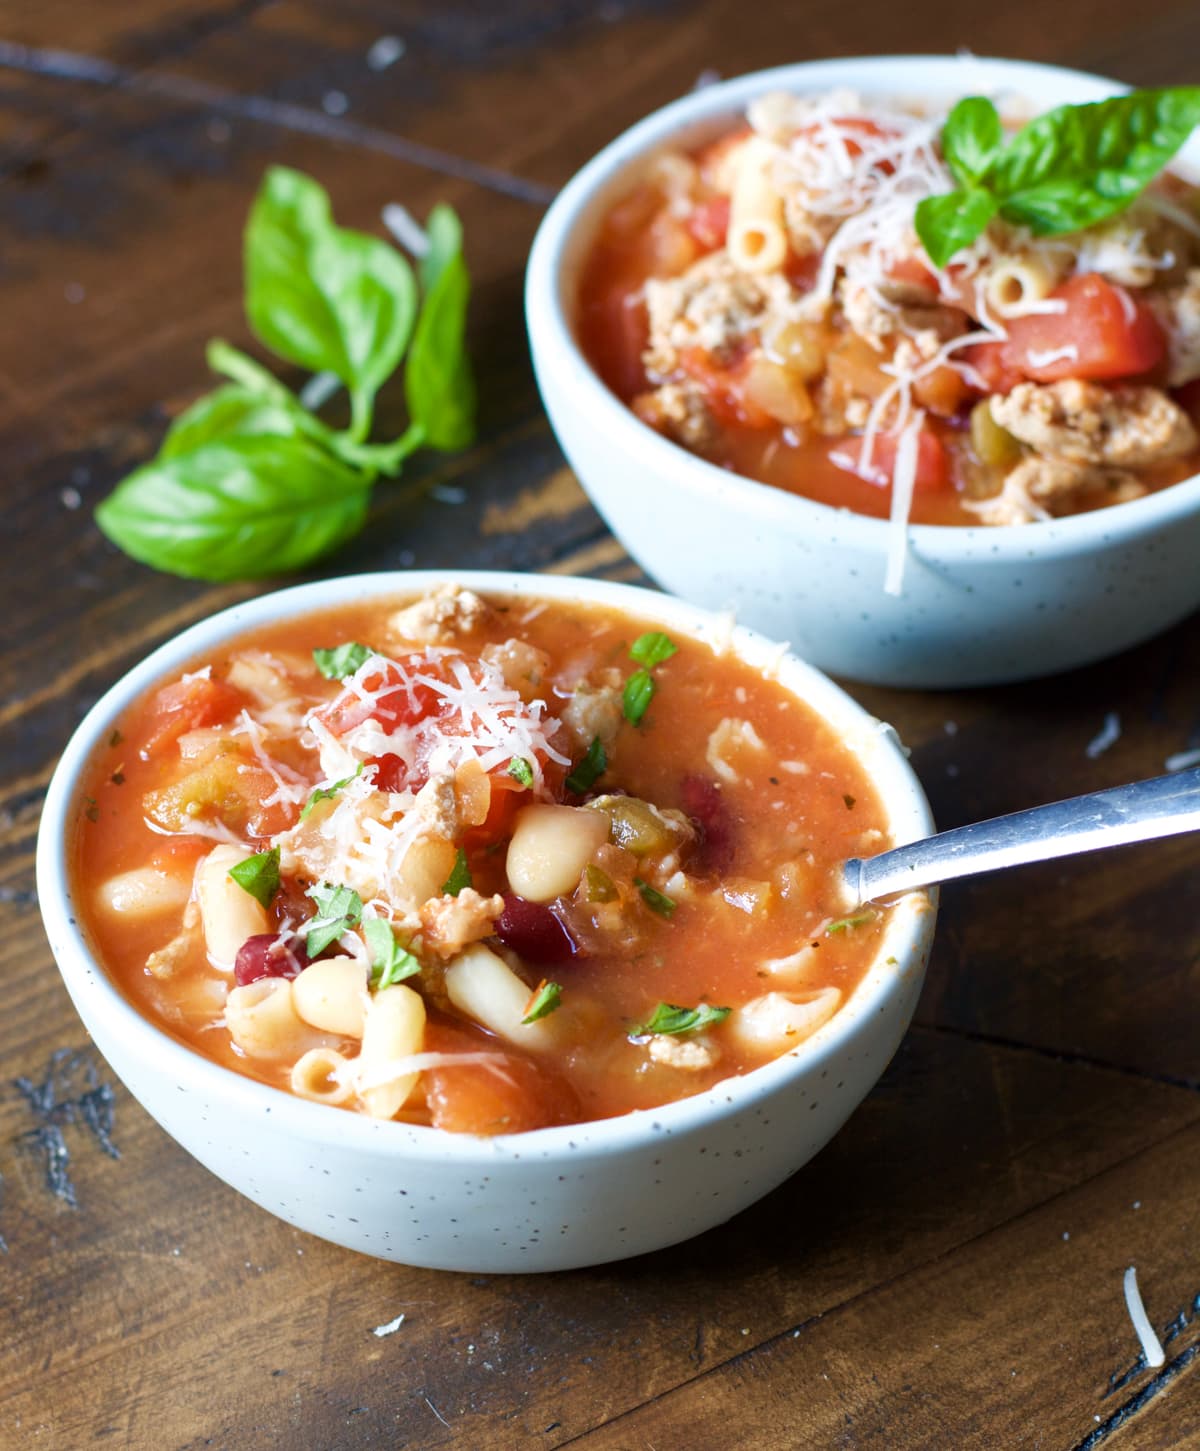 Slow Cooker Pasta Fagioli! A really simple, hearty meal that is perfect for your crock pot! And totally gluten free!